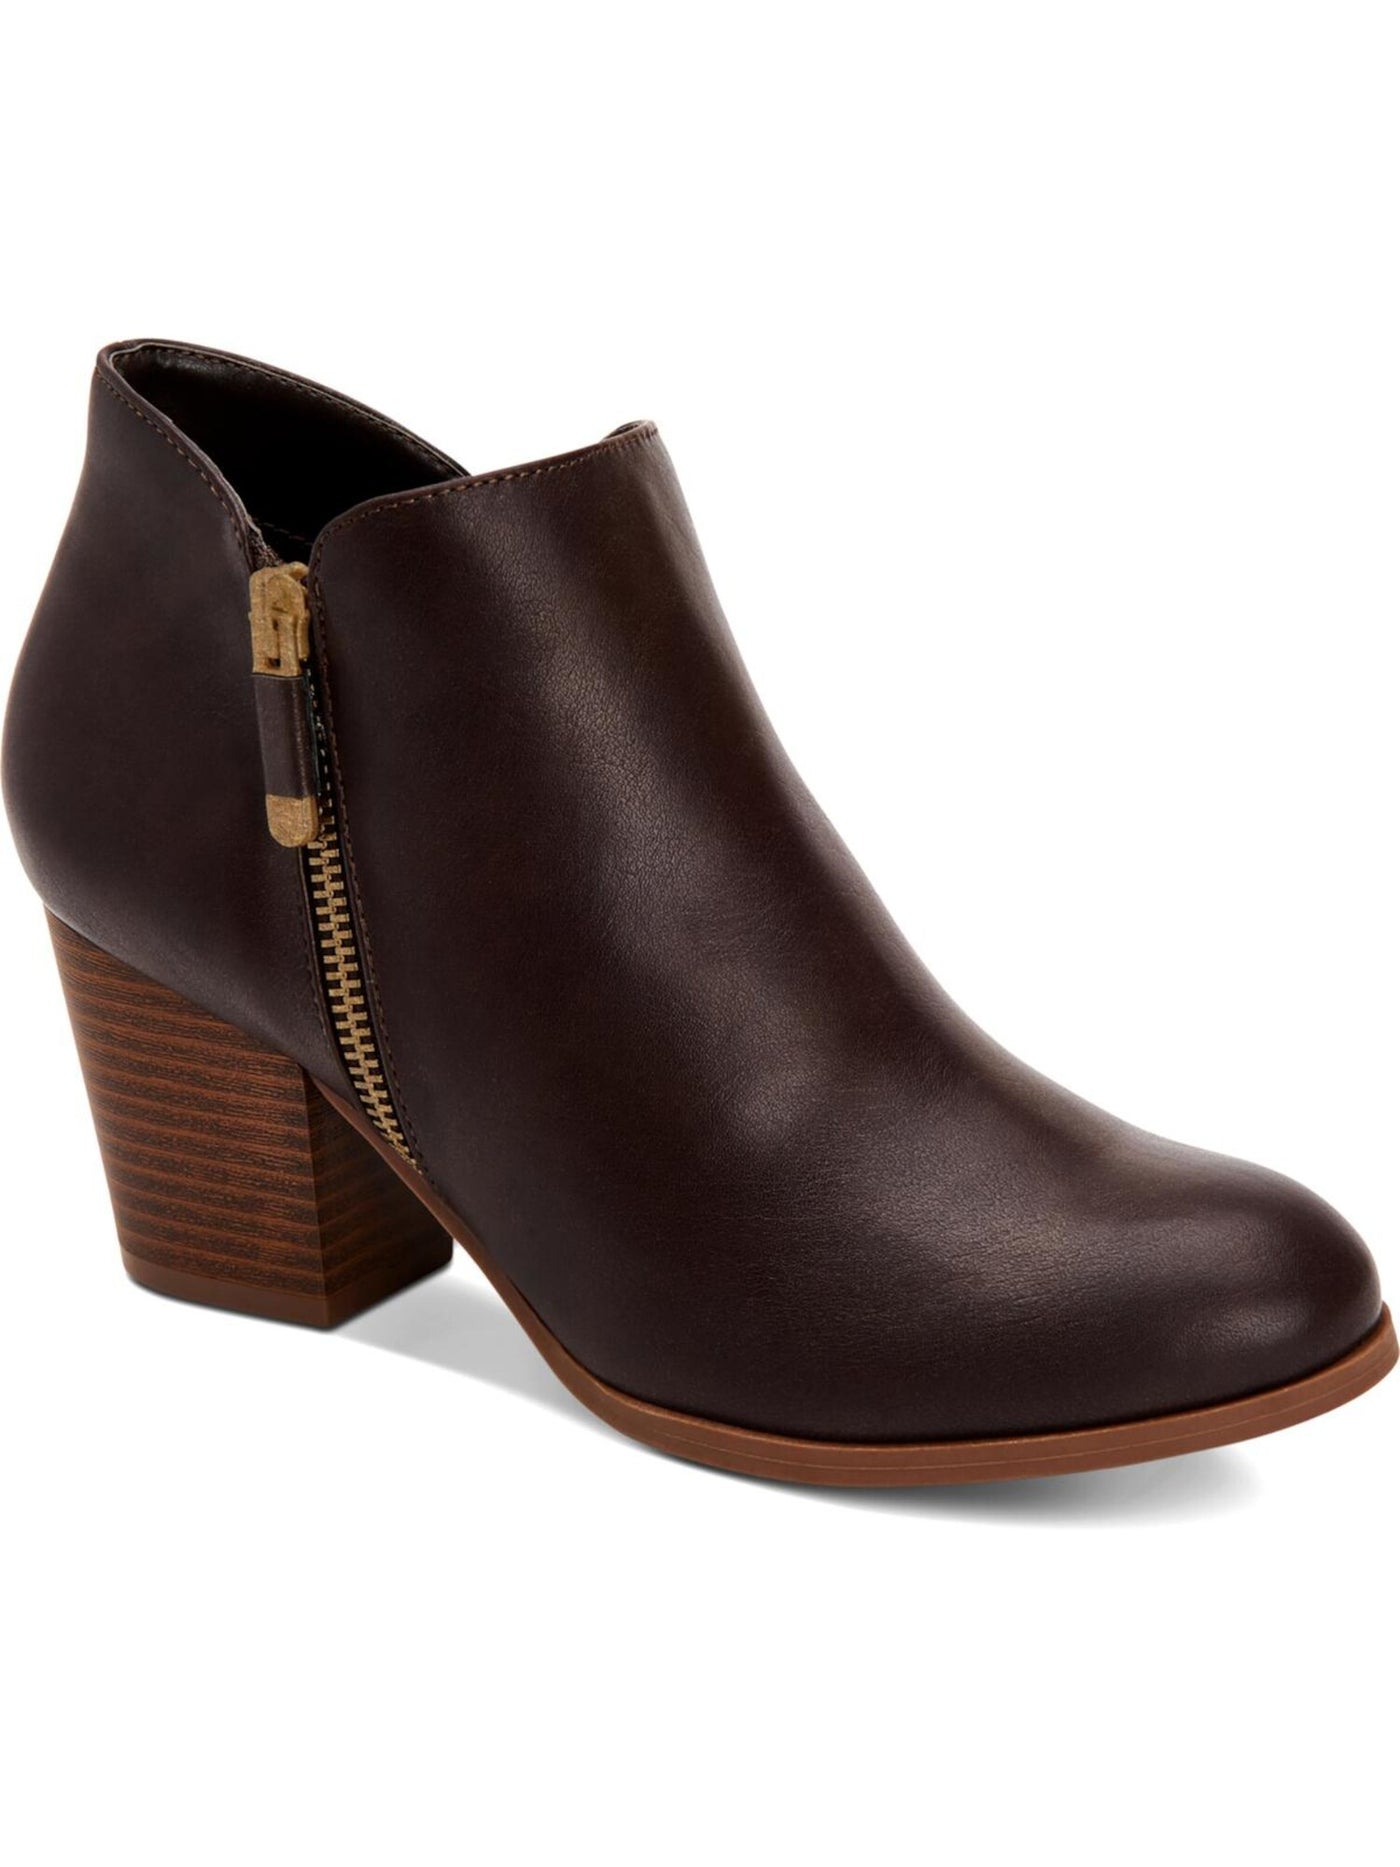 STYLE & COMPANY Womens Brown Notched At Sides Zipper Accent Masrinaa Almond Toe Block Heel Zip-Up Booties 5.5 M